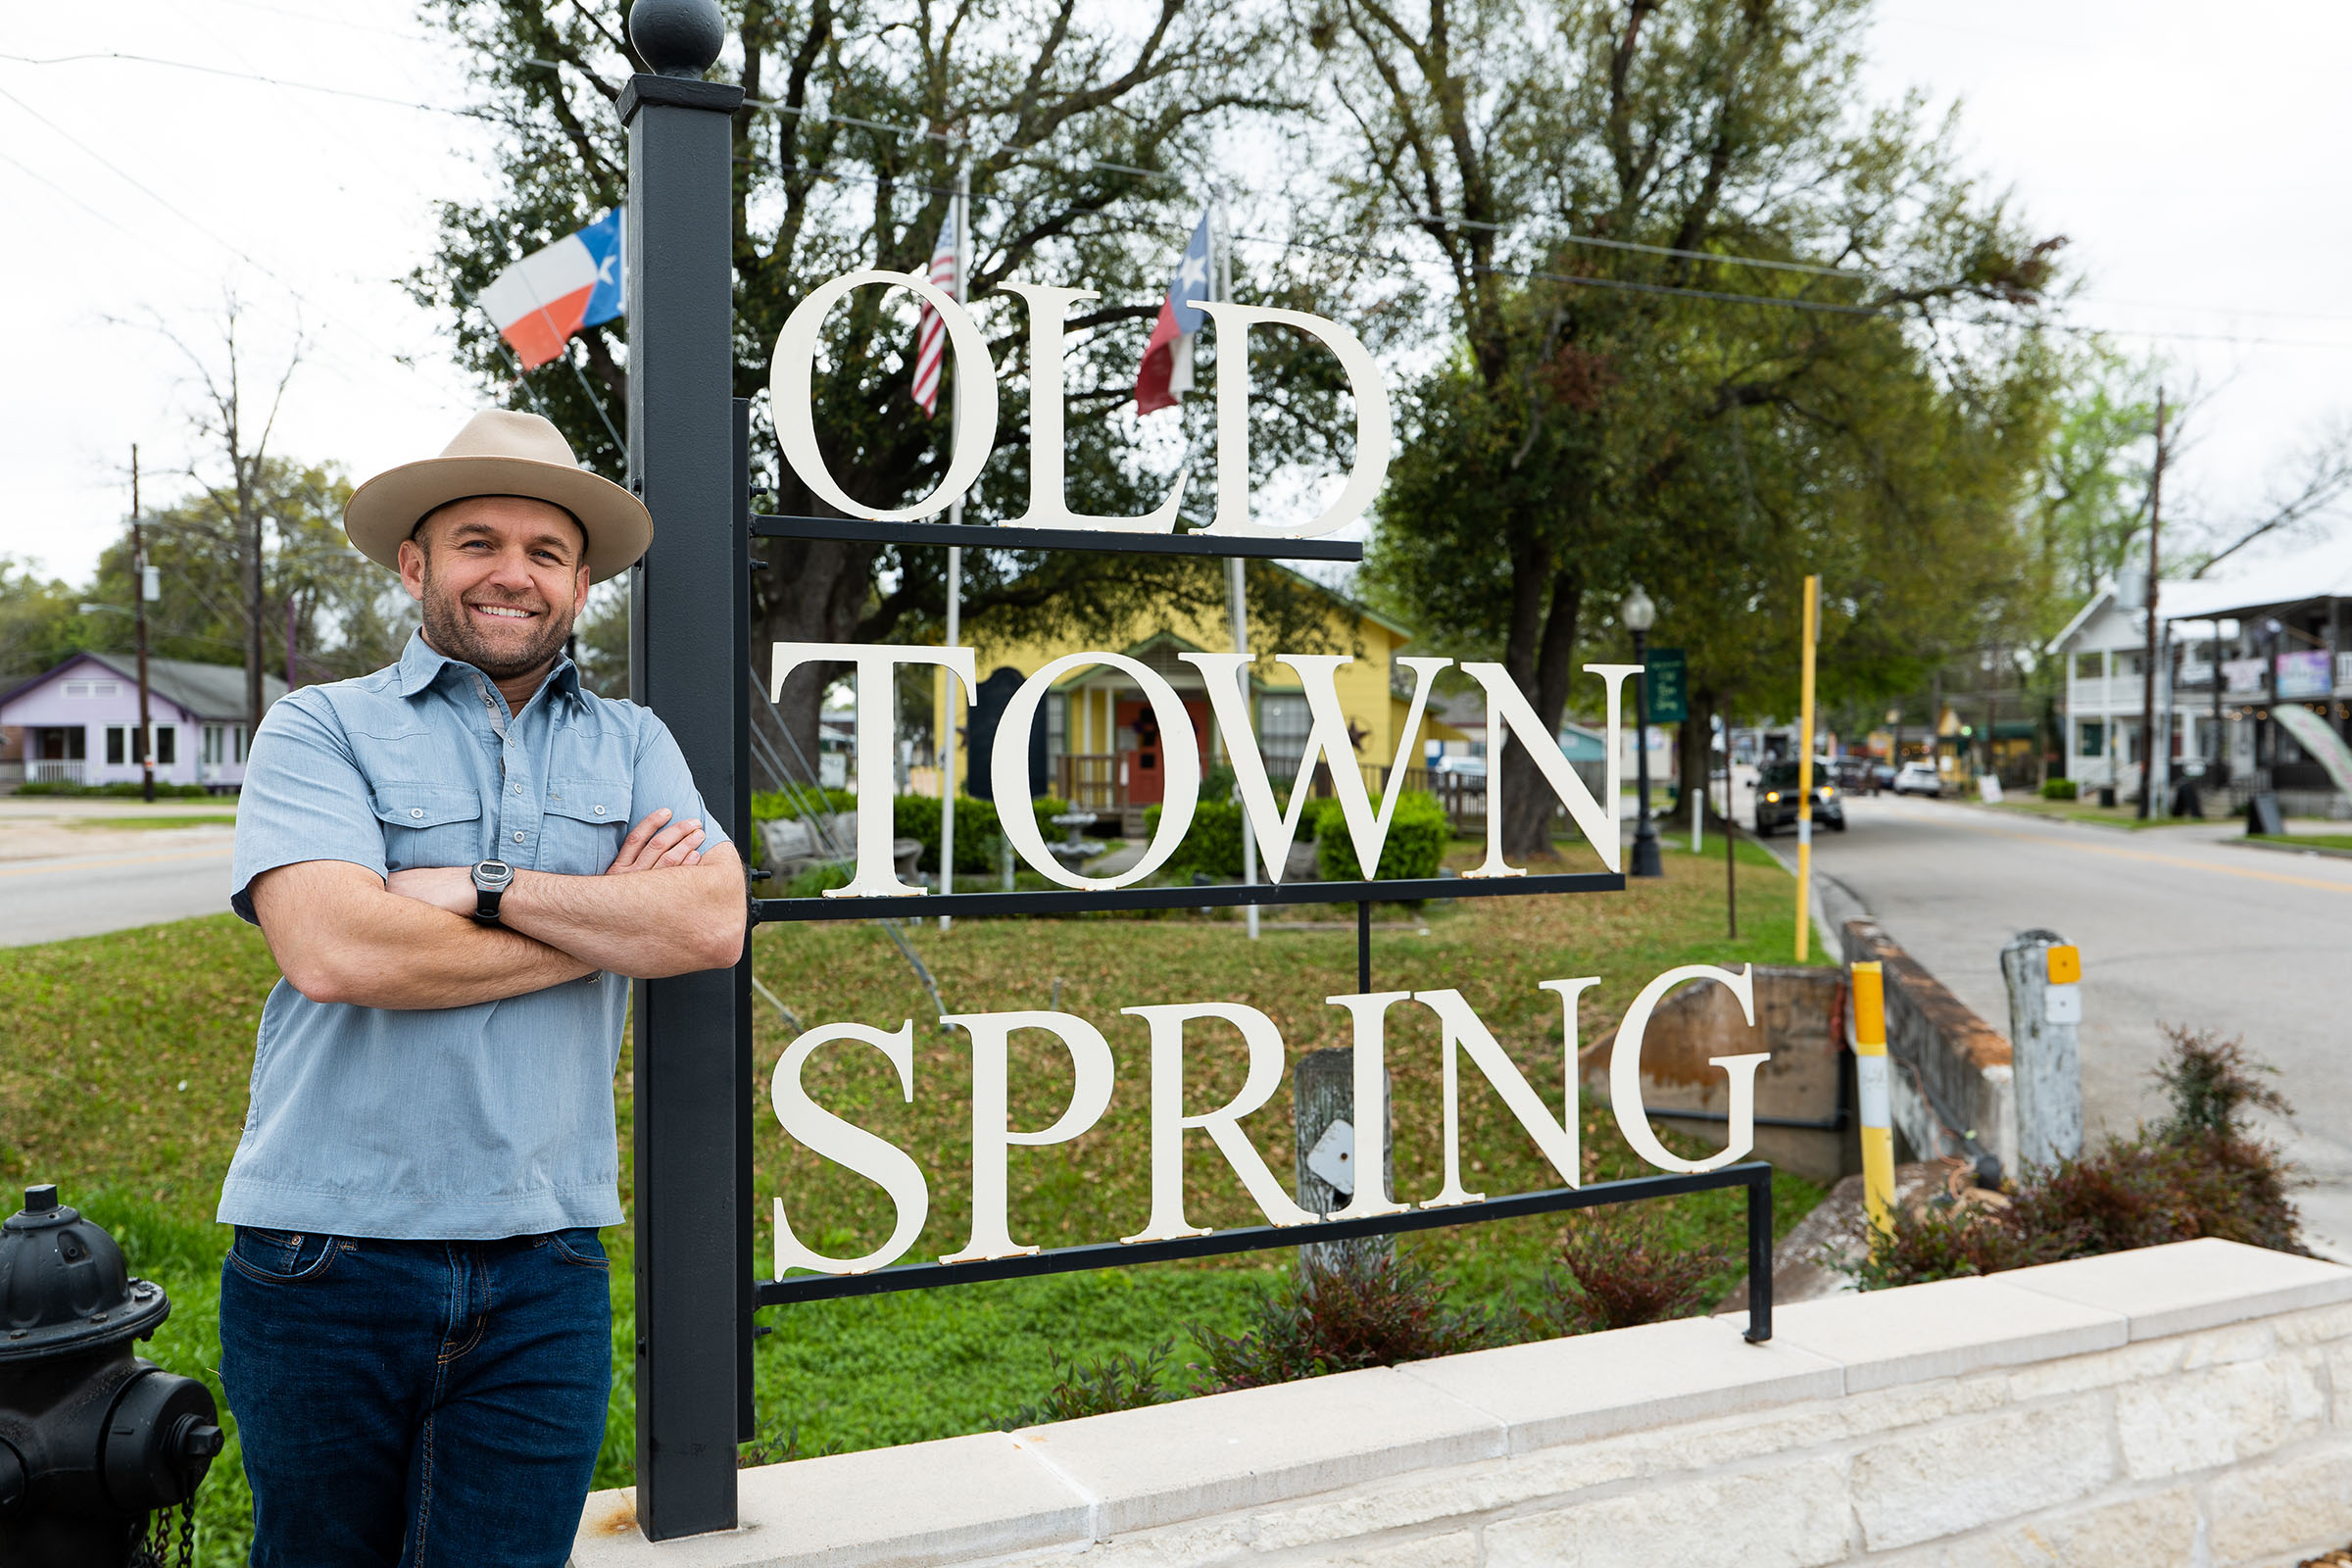 A man in a cowboy hat leans against a metal sign reading "OLD TOWN SPRING"